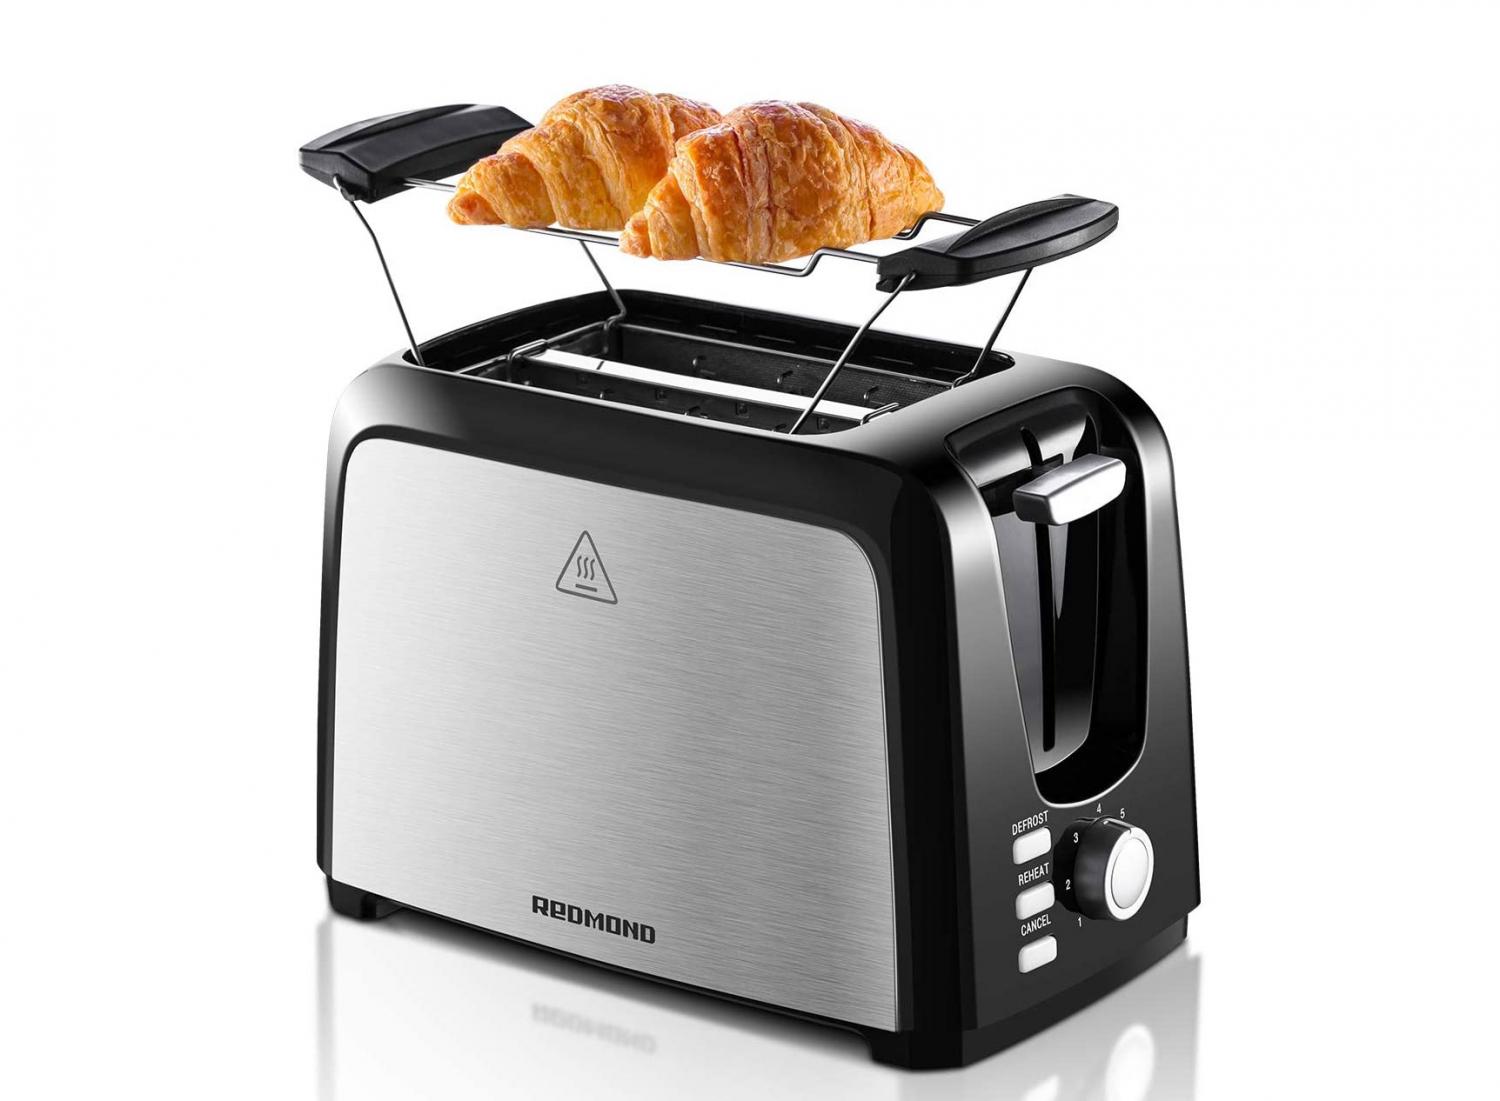 Toaster With Warming Rack - Pastry warming toaster